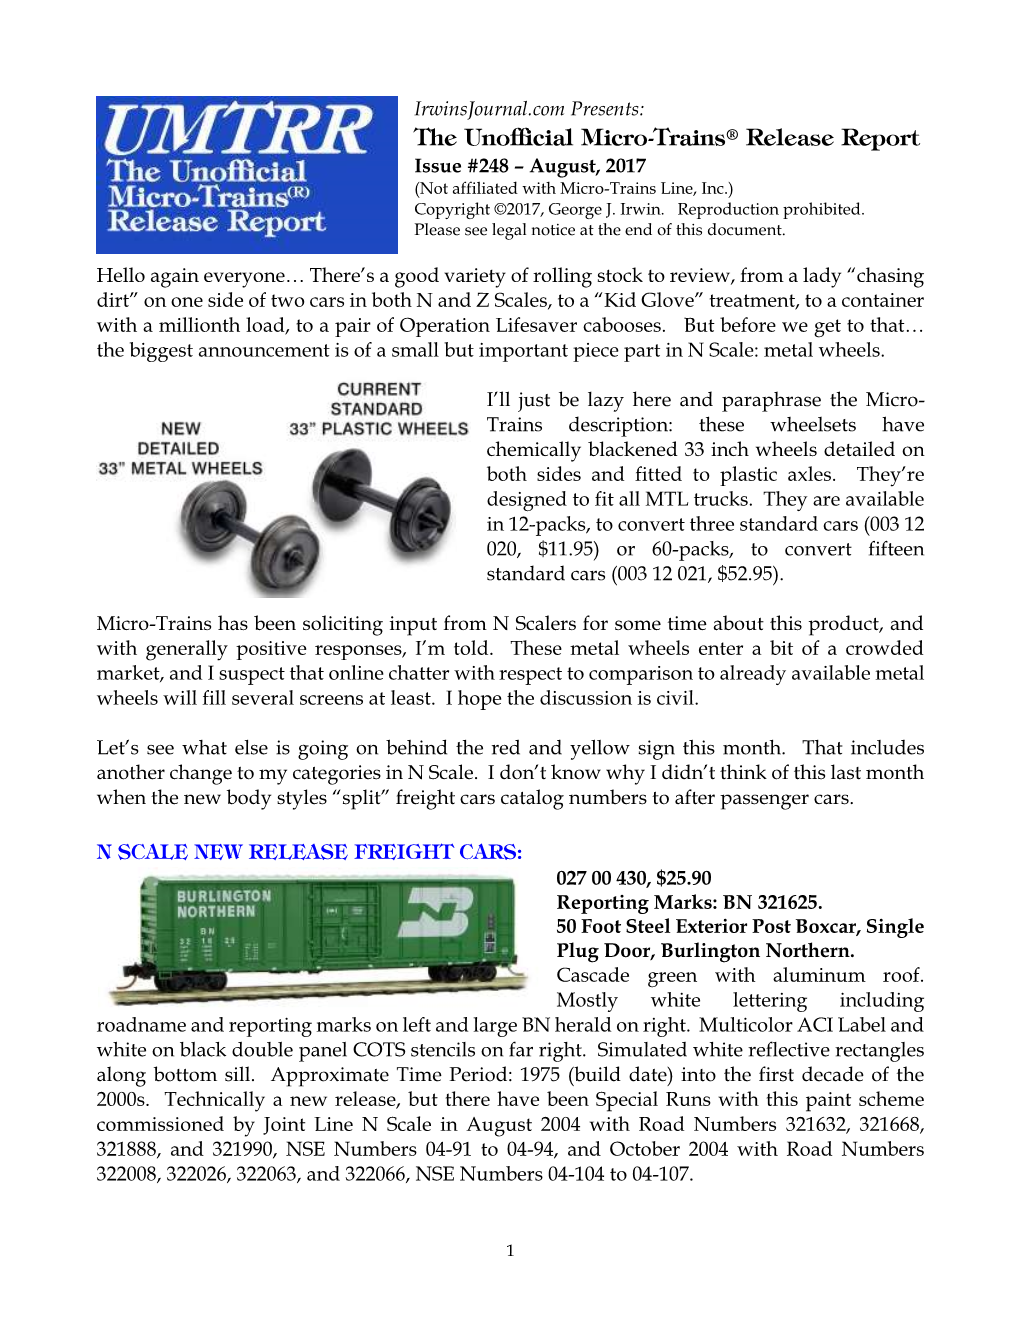 The Unofficial Micro-Trains® Release Report Issue #248 – August, 2017 (Not Affiliated with Micro-Trains Line, Inc.) Copyright ©2017, George J